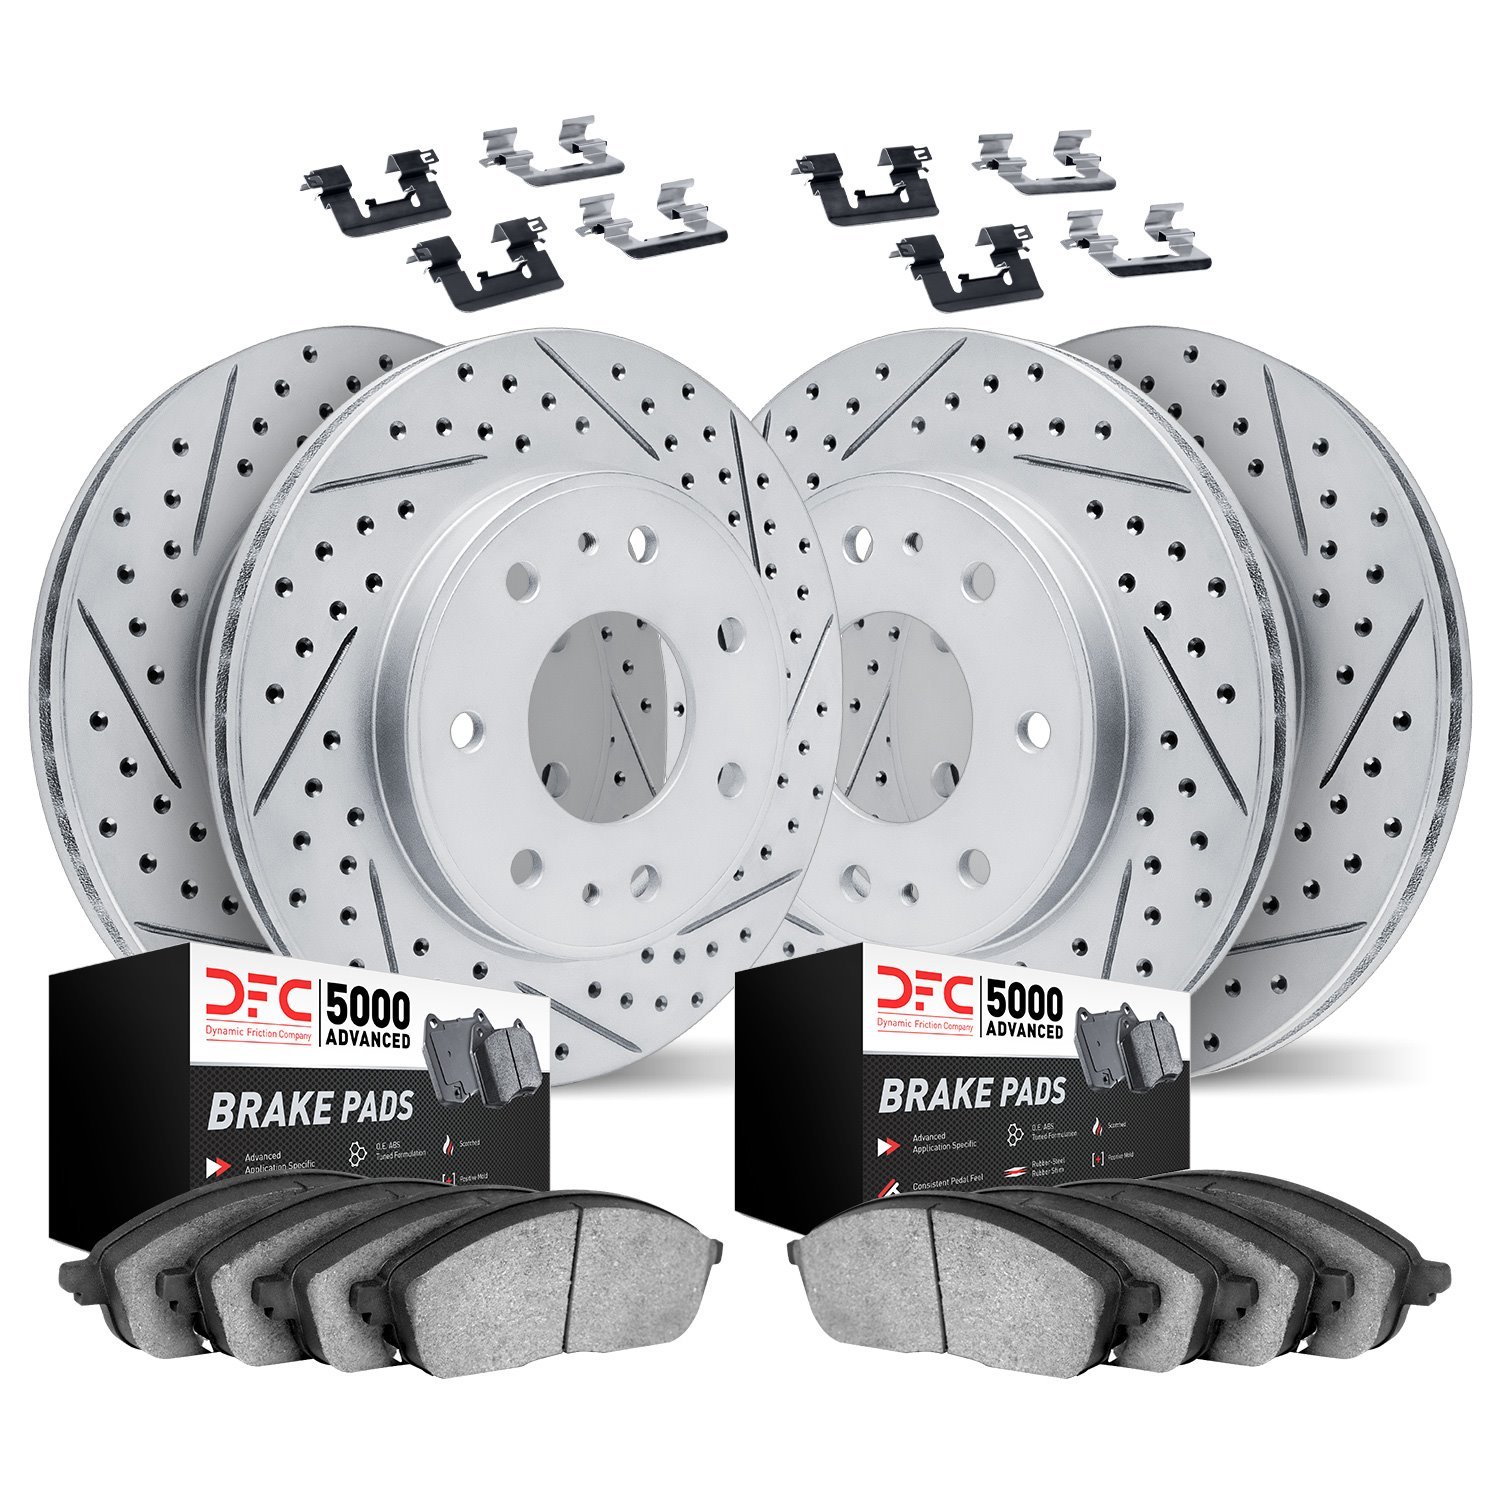 2504-54269 Geoperformance Drilled/Slotted Rotors w/5000 Advanced Brake Pads Kit, 2009-2009 Ford/Lincoln/Mercury/Mazda, Position: